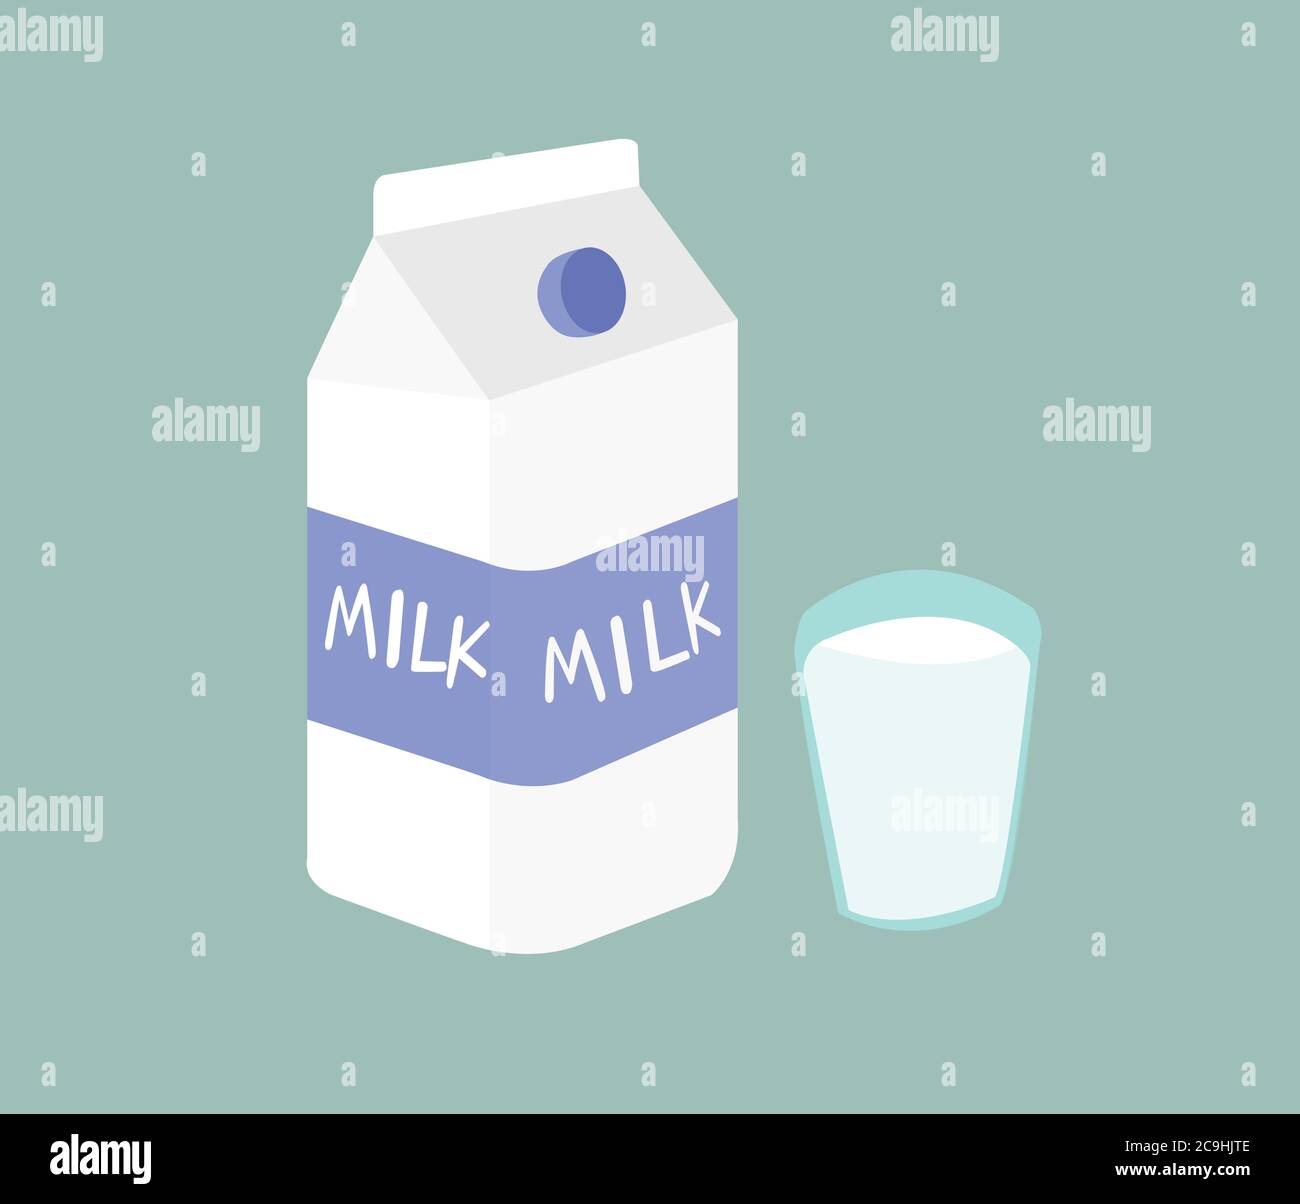 Milk is the product of cows there are many benefits. Picture of milk and glass of milk on green background. Stock Vector